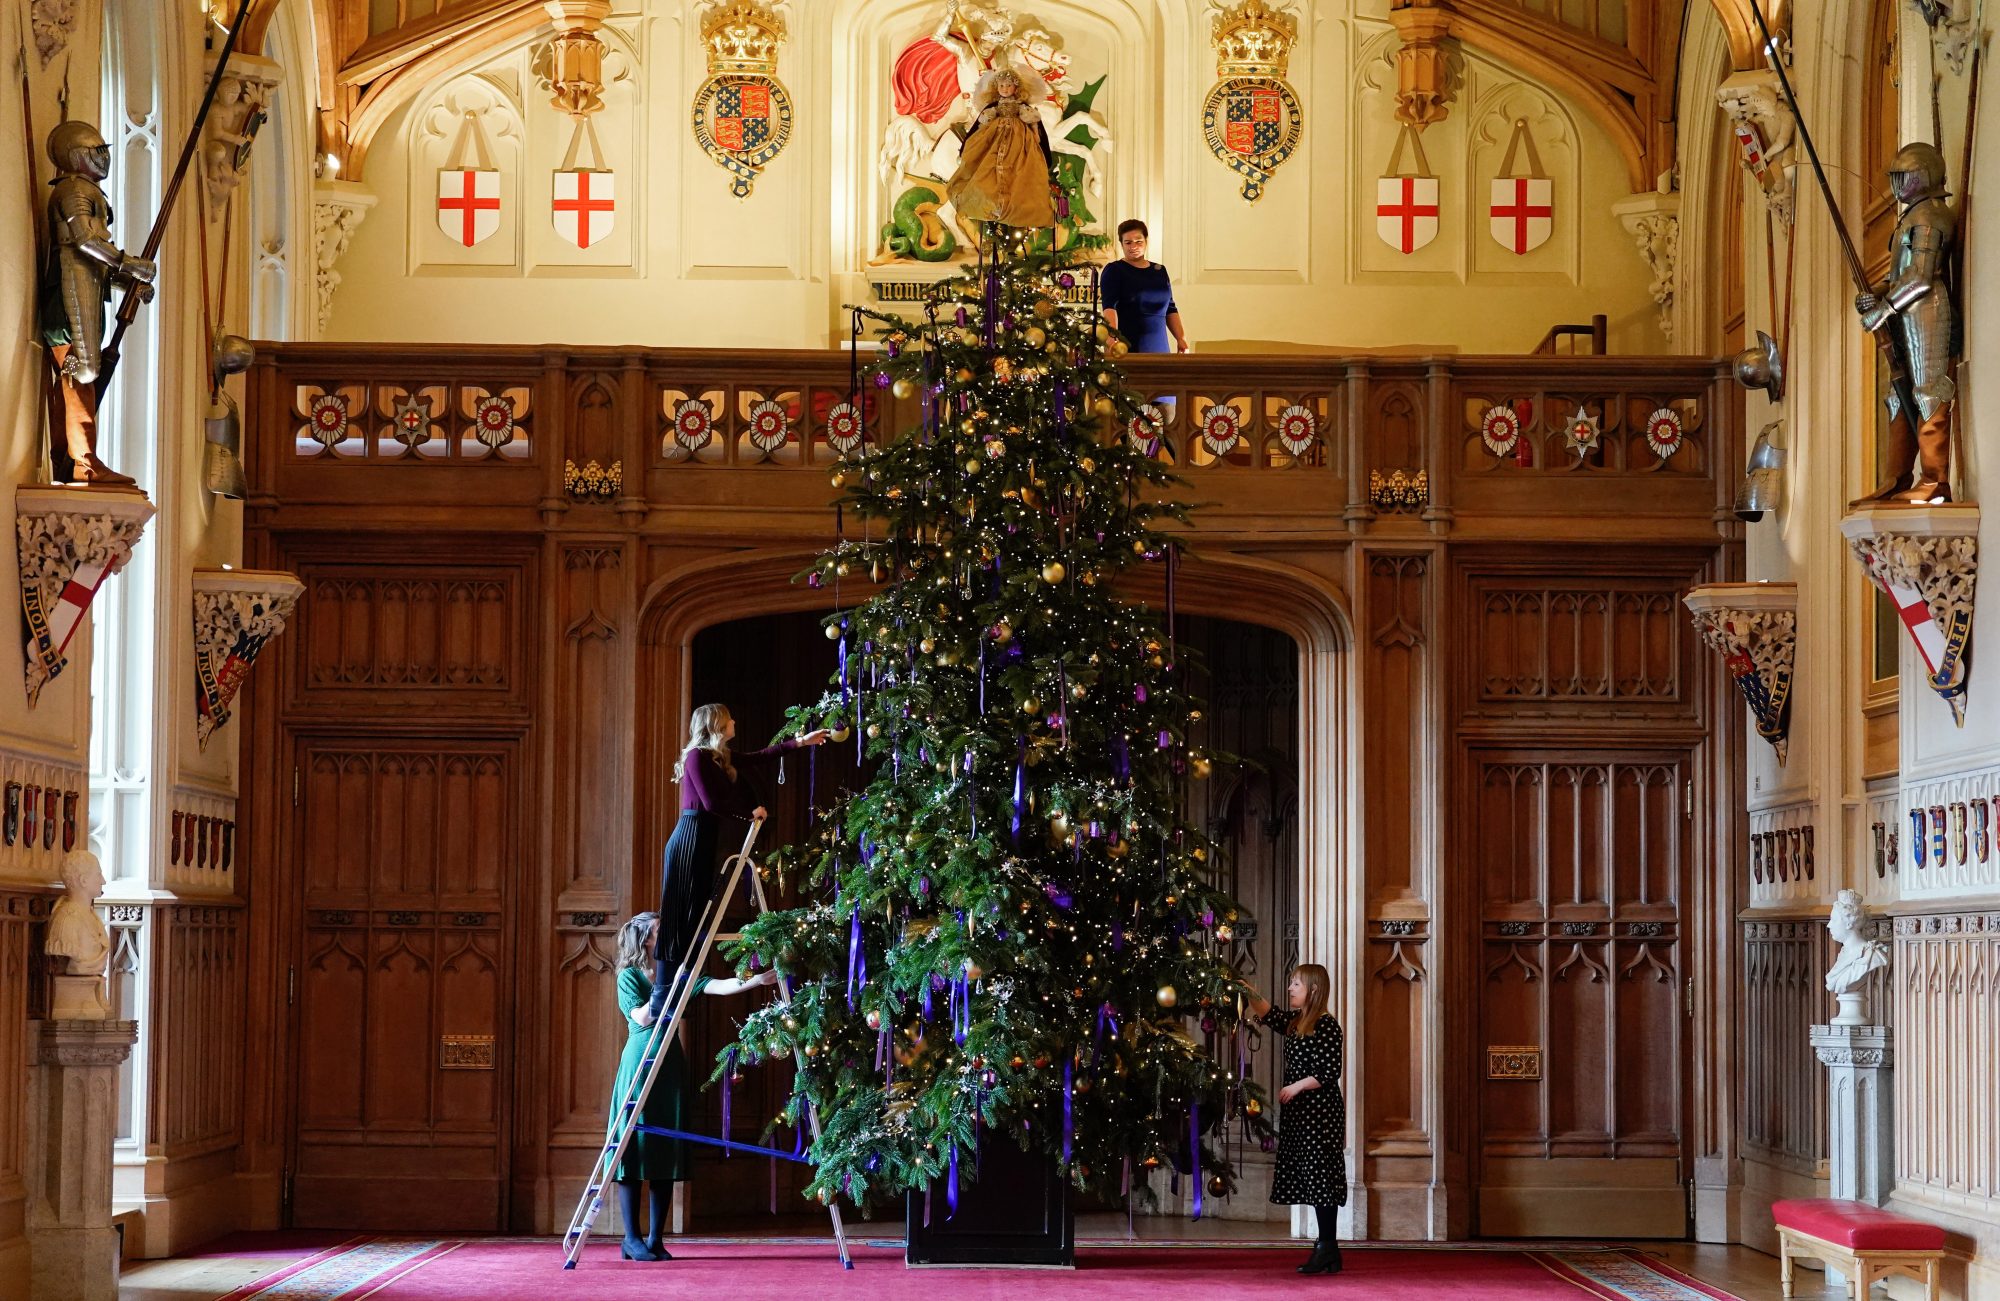 November 24, 2022, Windsor, UK: Members of the Royal Collection Trust make finishing touches to a 20-foot-high Nordmann Fir Christmas tree in St George's Hall, which was felled from Windsor Great Park, during a photo call for Christmas decorations at Windsor Castle, Berkshire. (Credit Image: © Andrew Matthews/PA Wire via ZUMA Press)